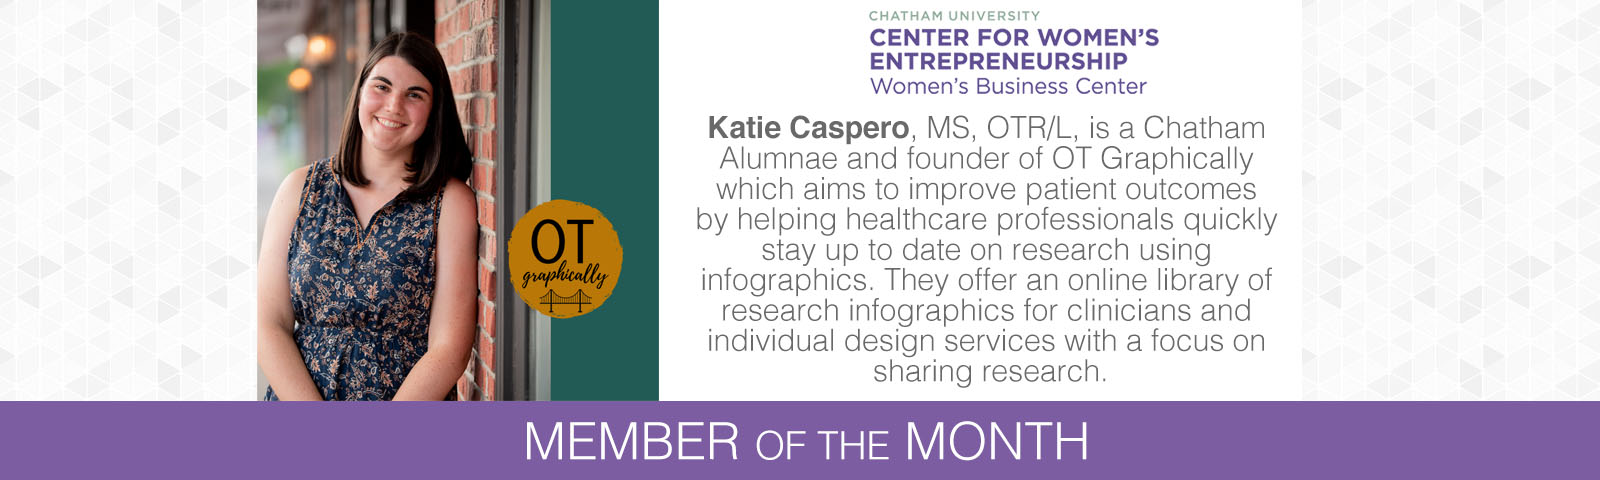 
Katie Caspero, MS, OTR/L, is a Chatham Alumnae and founder of OT Graphically which aims to improve patient outcomes by helping healthcare professionals quickly stay up to date on research using infographics. They offer an online library of research infographics for clinicians and individual design services with a focus on sharing research.